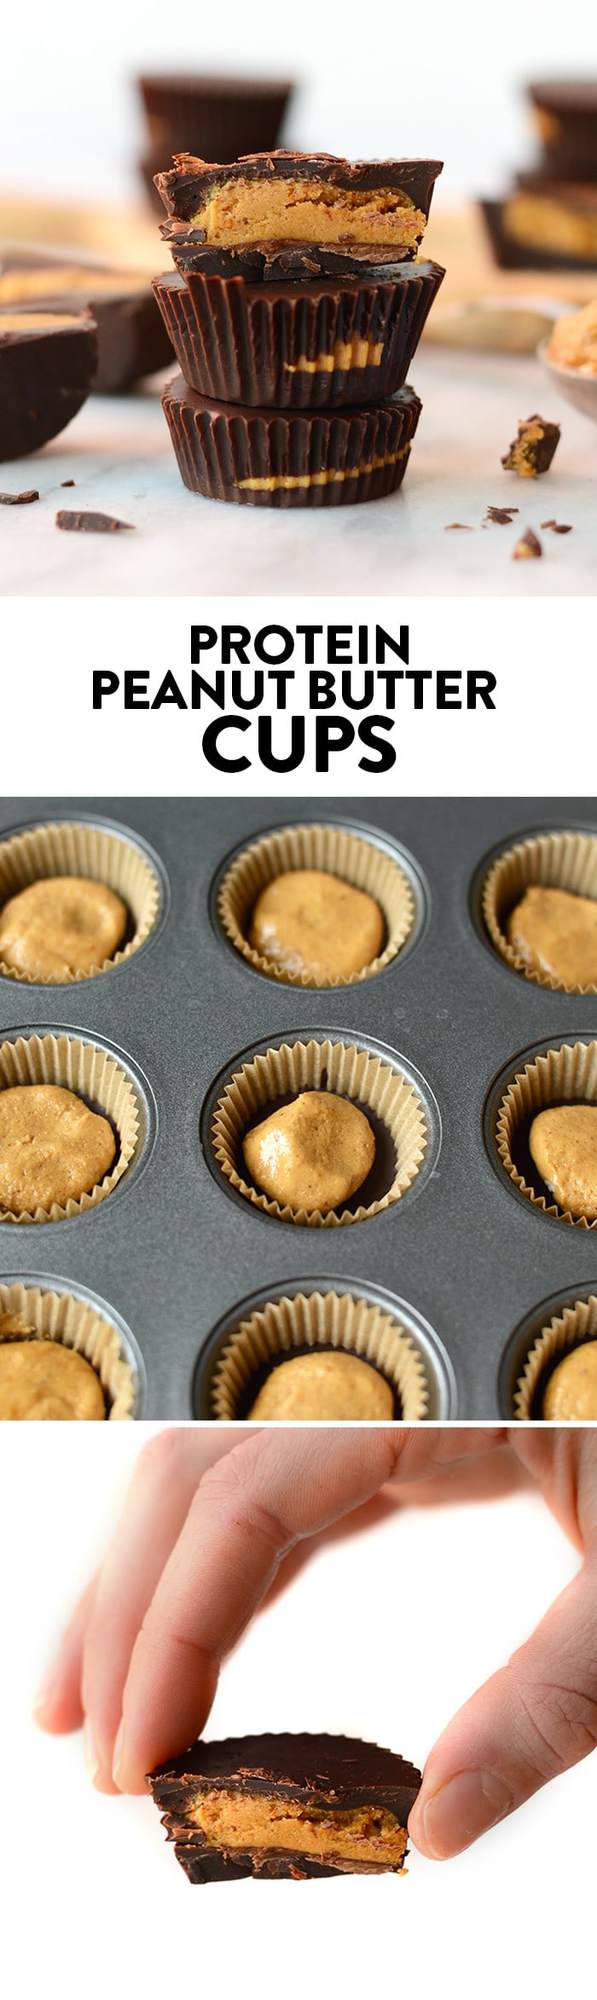 What's better than a peanut butter cup? A peanut butter cup amped with extra protein! Make these delicious protein peanut butter cups with just a few ingredients!